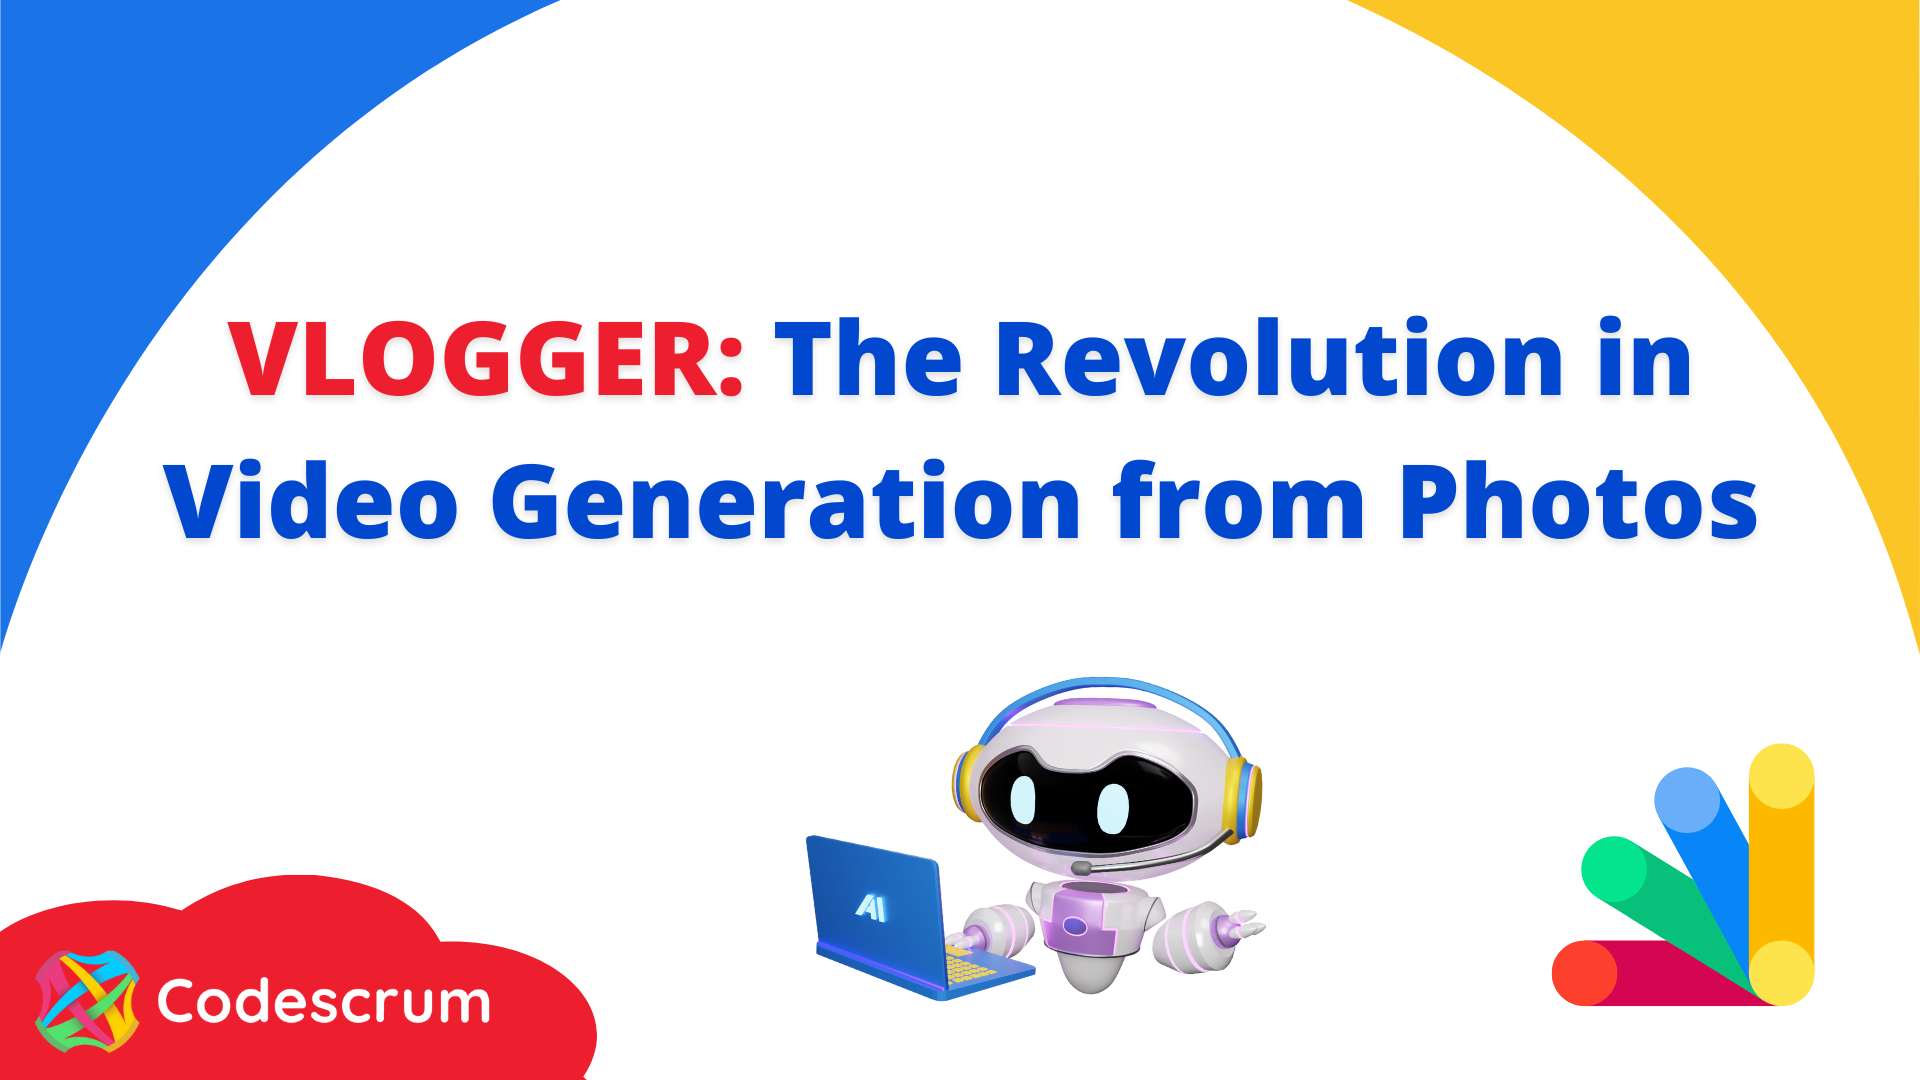 VLOGGER: The Revolution in Video Generation from Photos